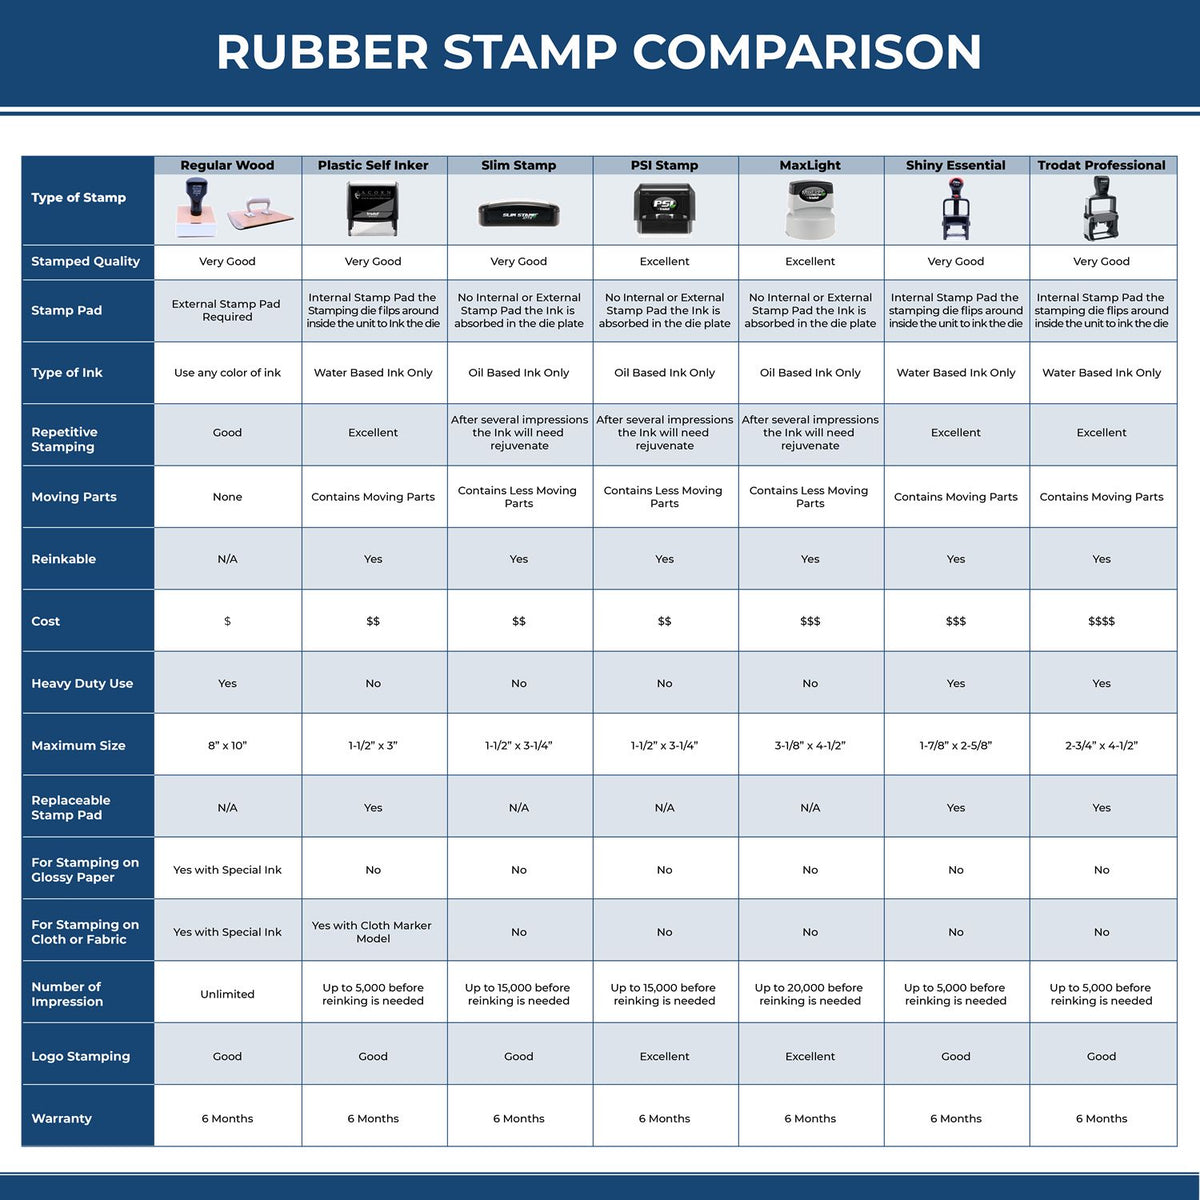 Late with Border Rubber Stamp 4800R Rubber Stamp Comparison